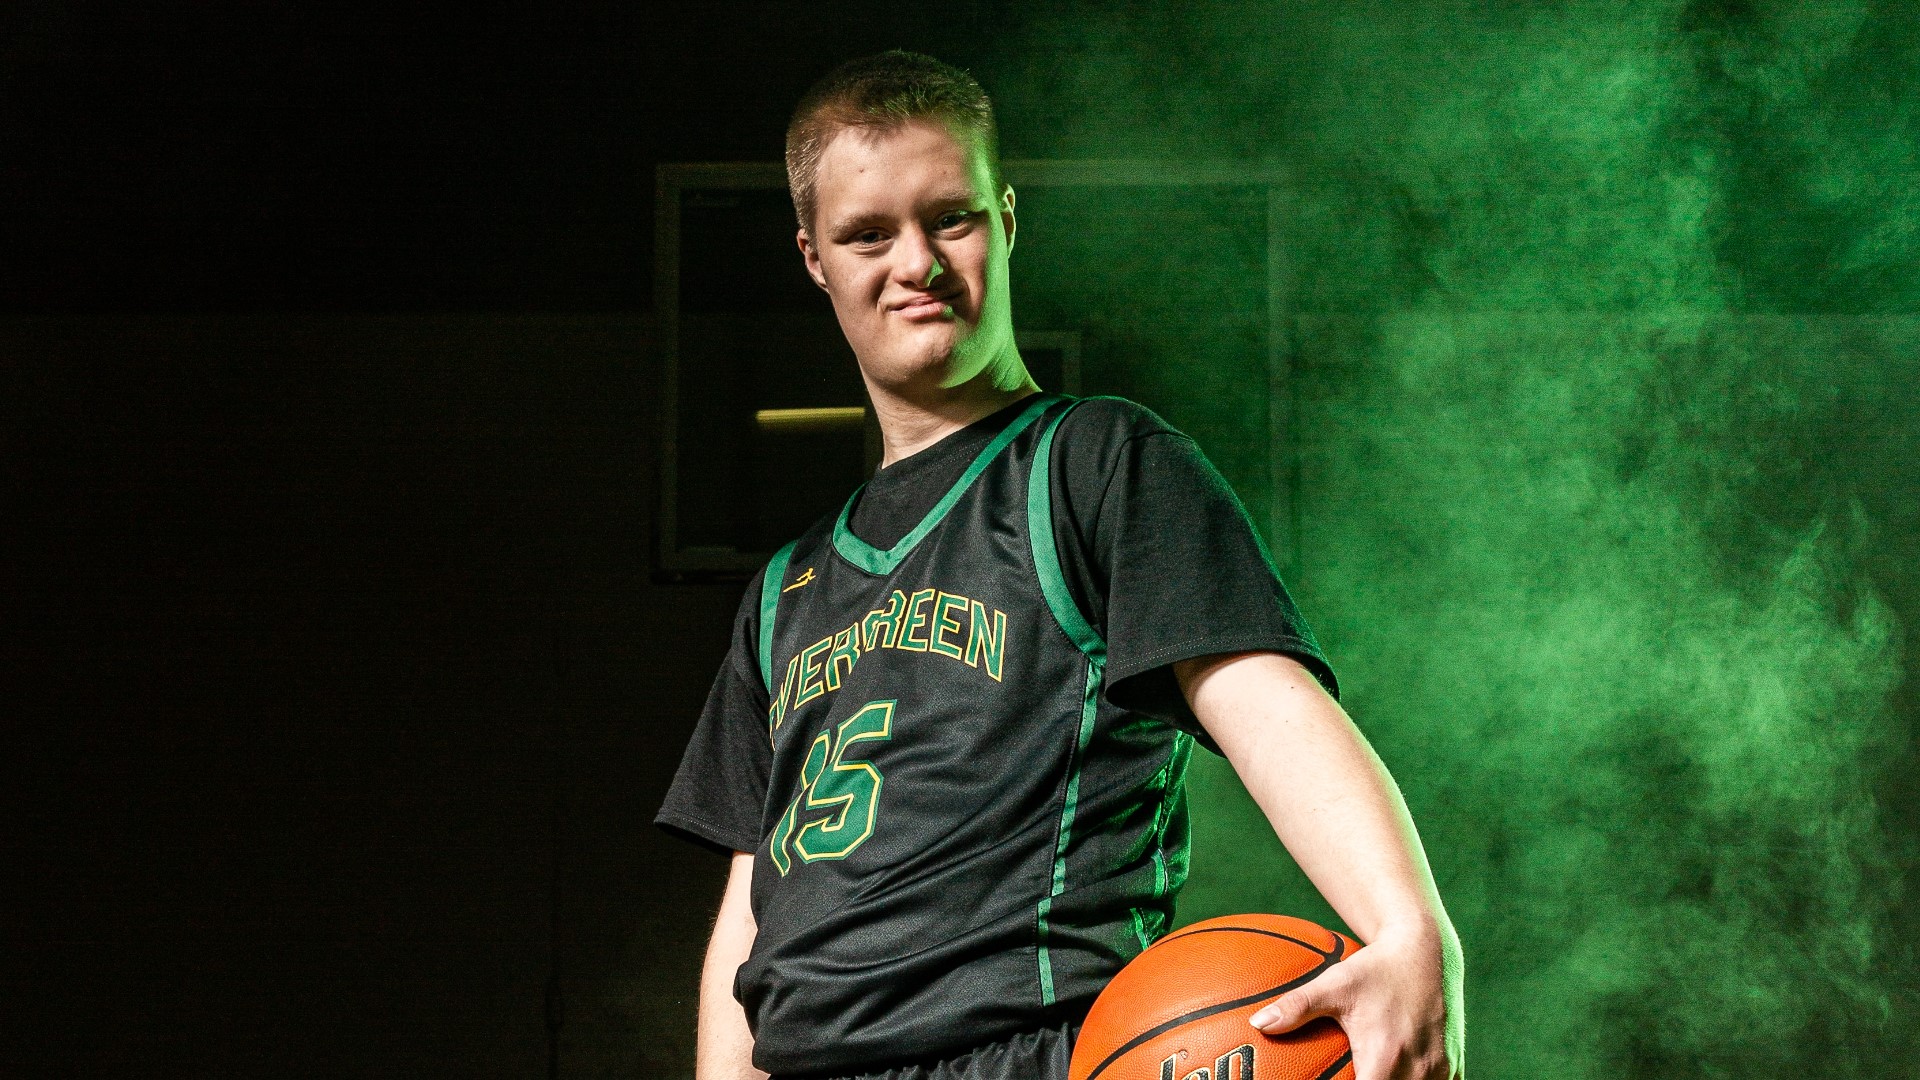 Grant Adams has never let Down syndrome stop him from making his teammates better. On Senior Night, they showed him how grateful they are.